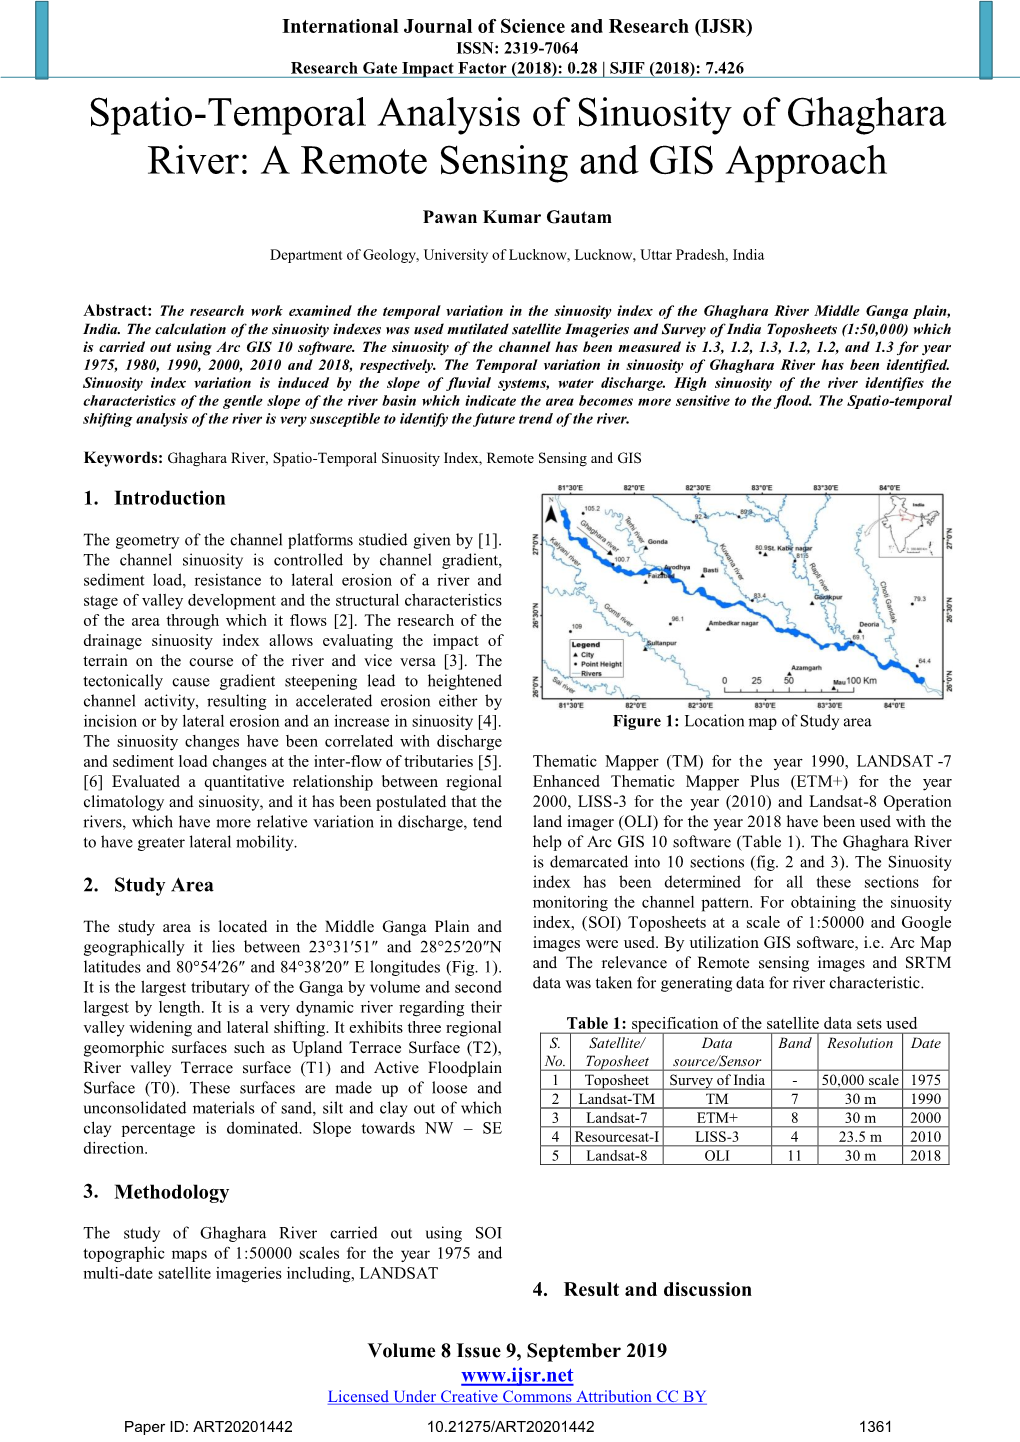 Spatio-Temporal Analysis of Sinuosity of Ghaghara River: a Remote Sensing and GIS Approach